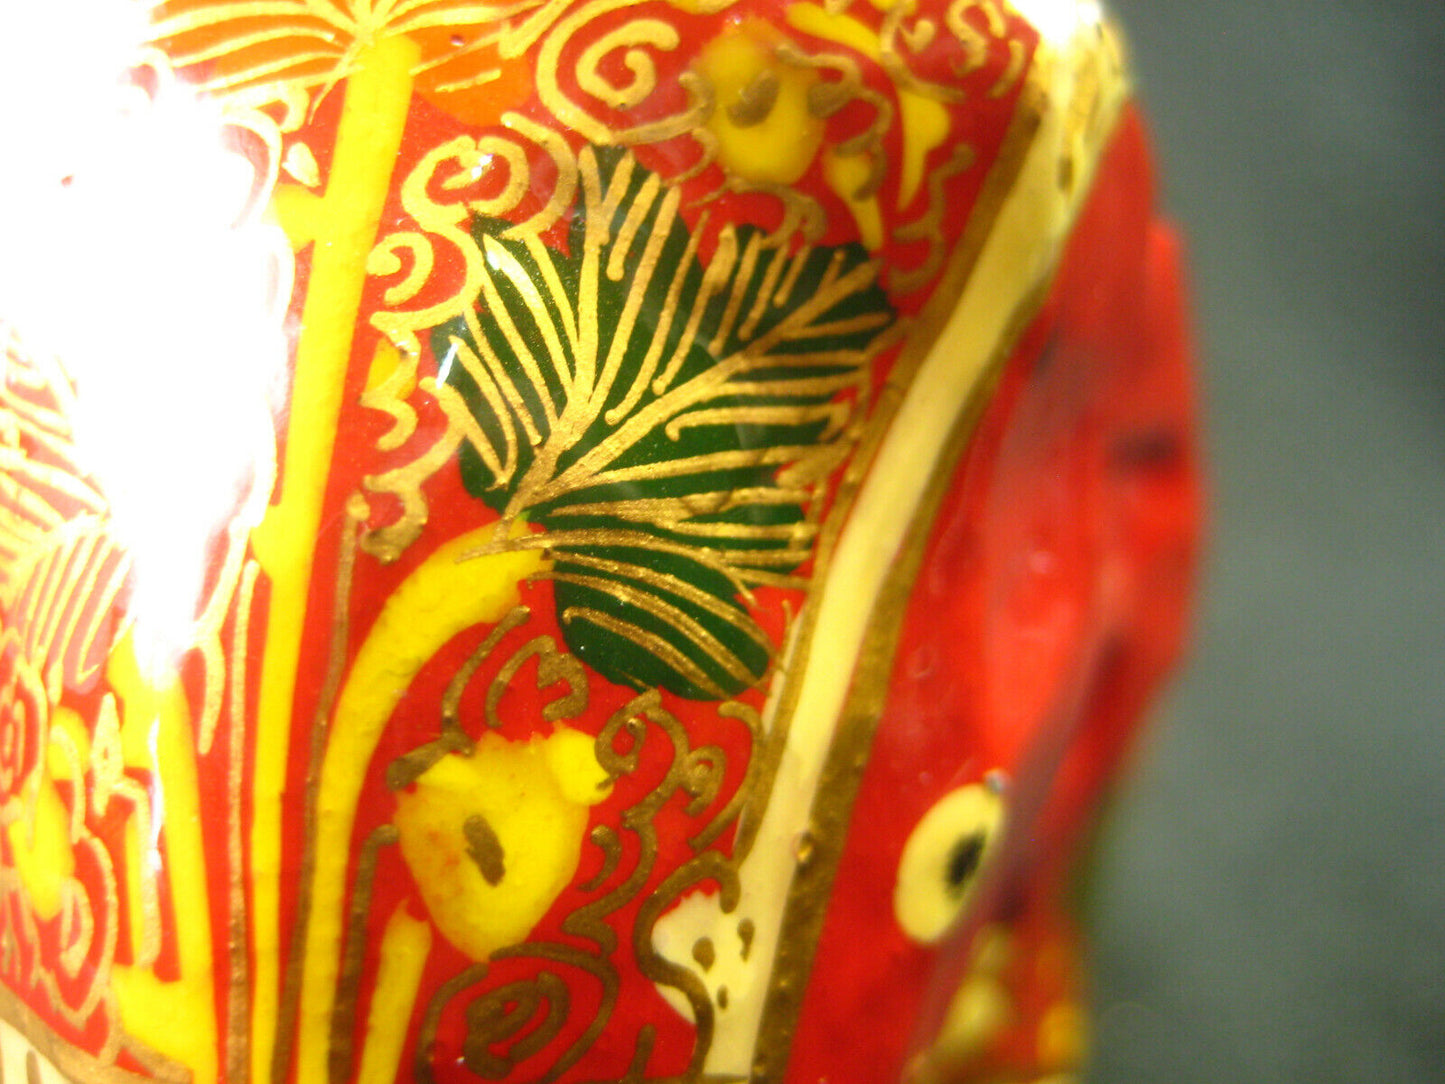 Red Elephant Figurine Leaf Pattern Gold White Pink Green Hand Painted 5" Tall